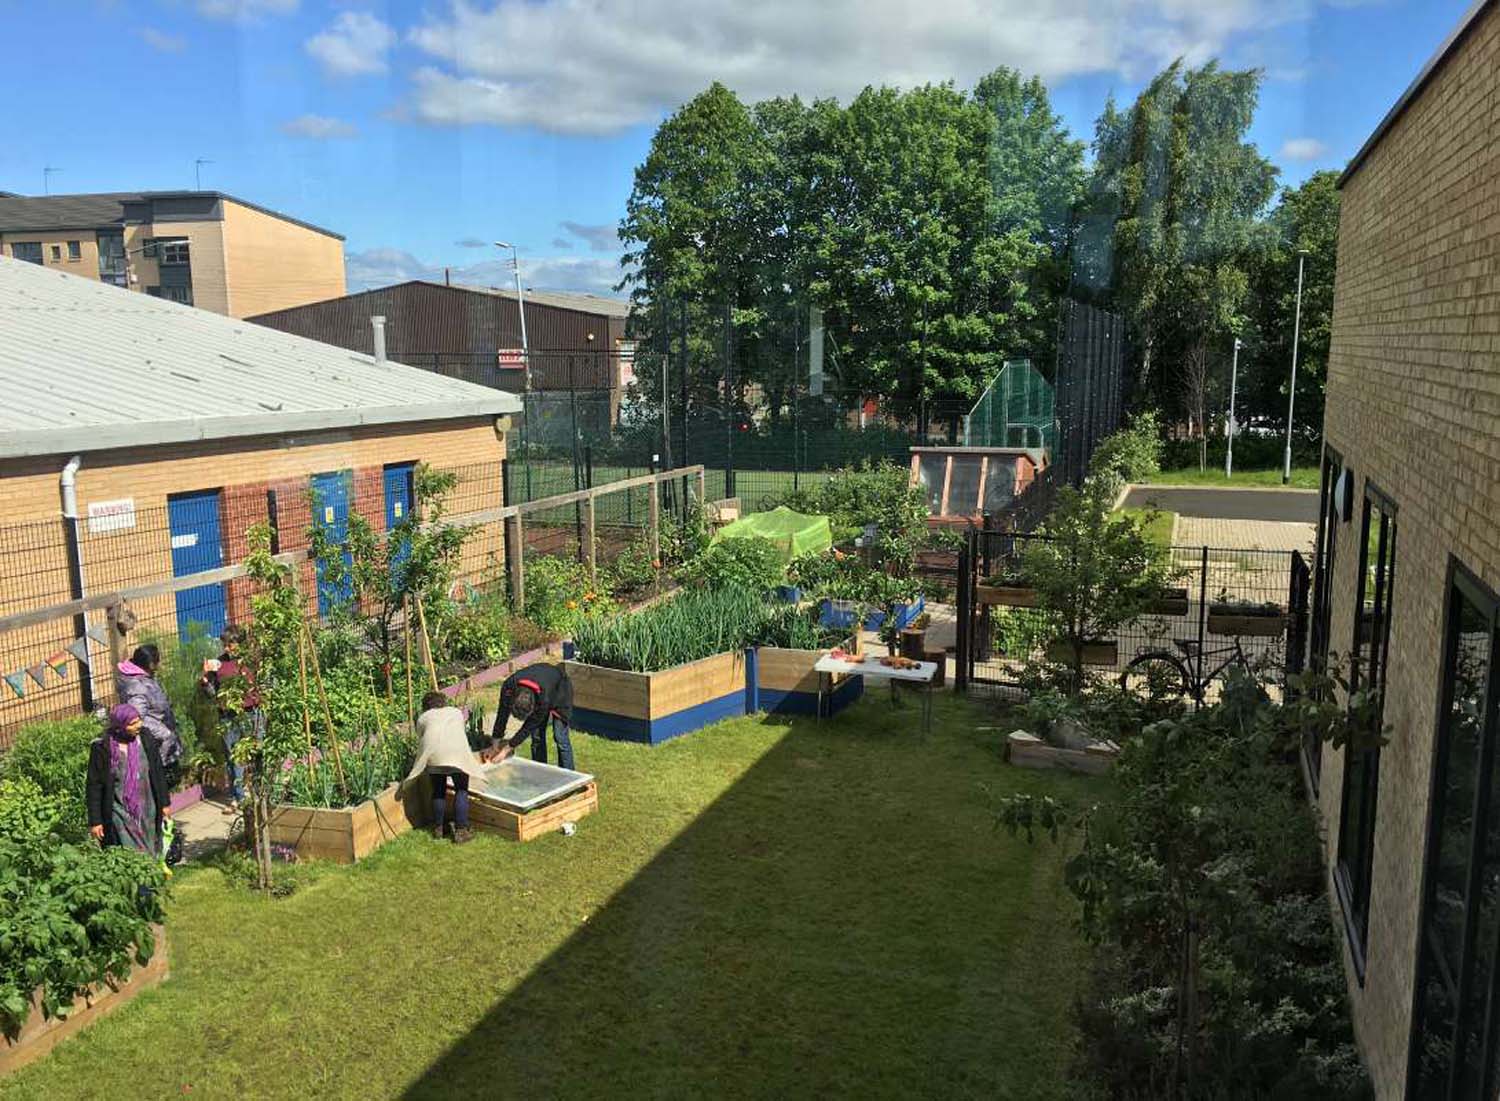 A group of people working in a community garden digging in raised beds, in the grassy courtyard of a brick building